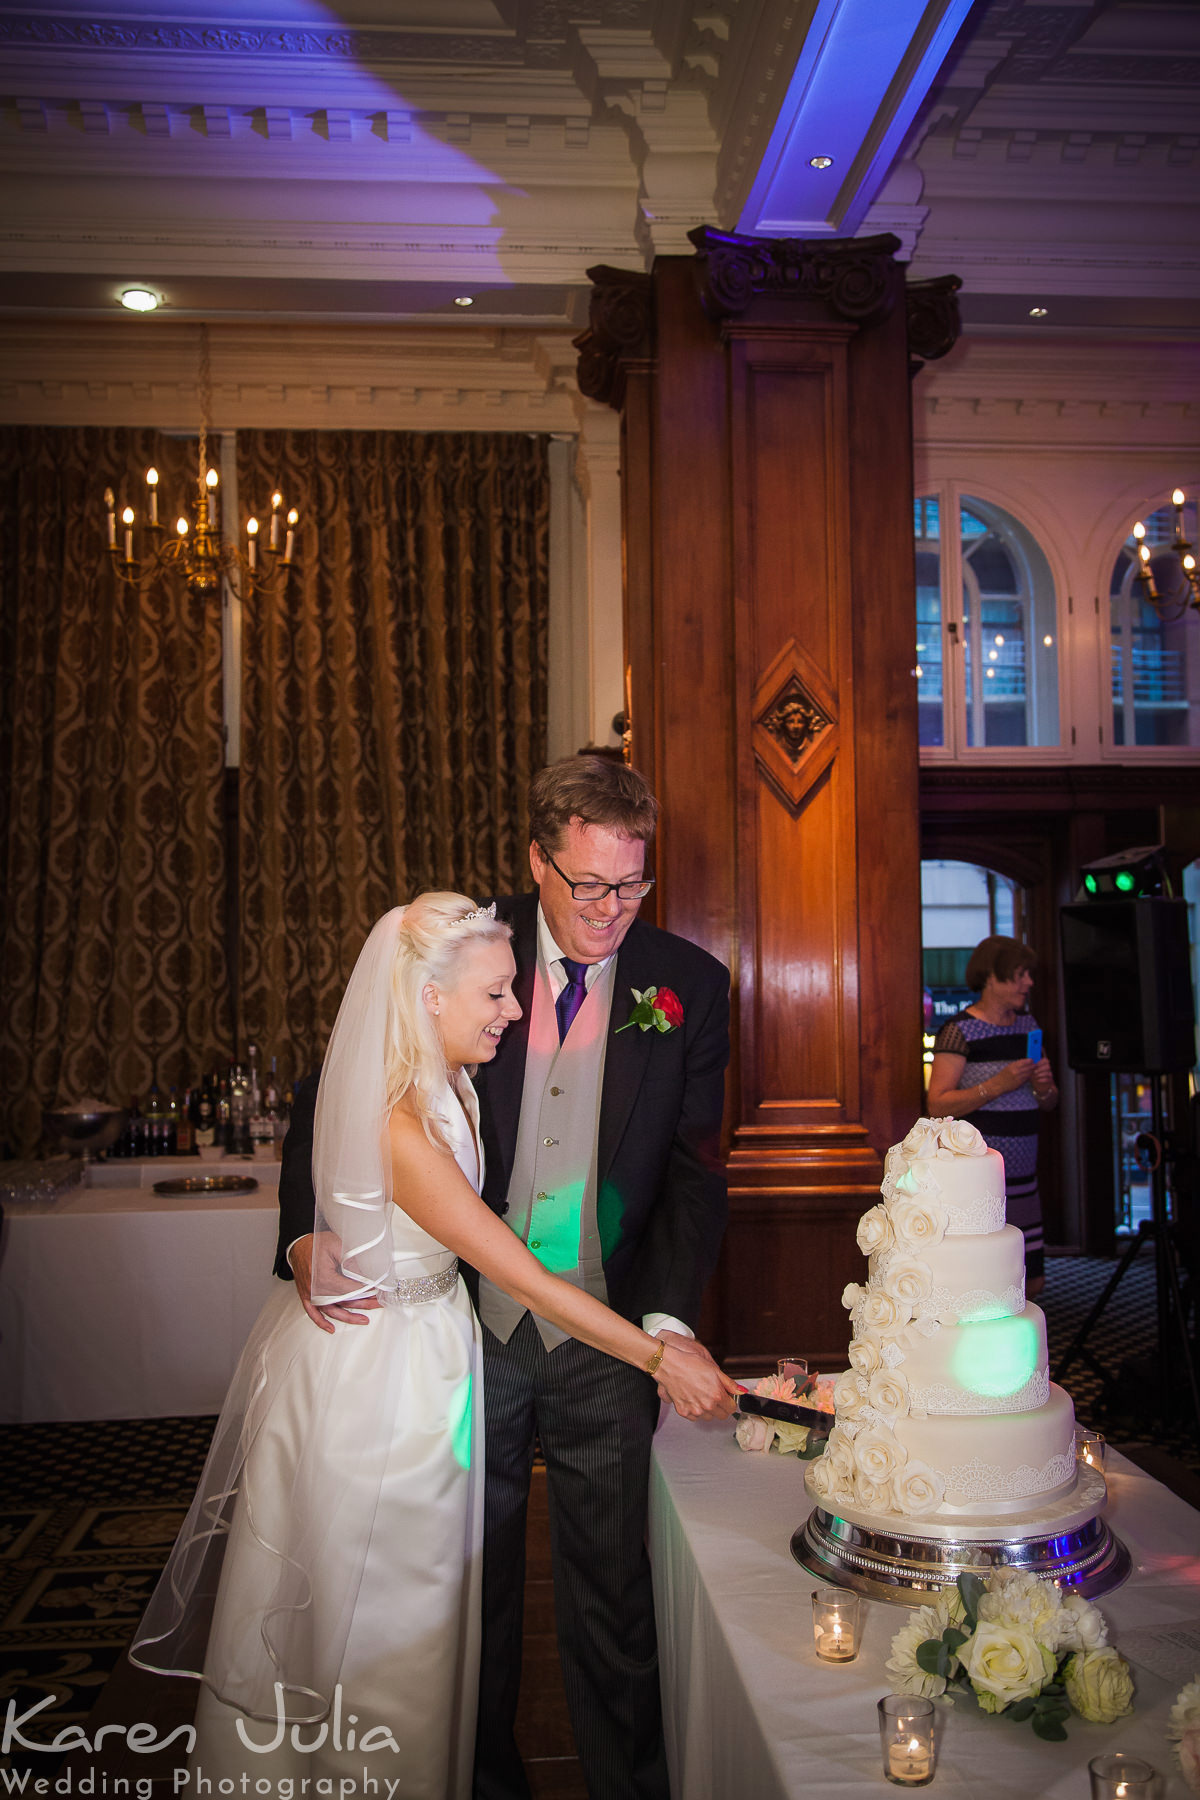 bride and groom cut the cake at their wedding reception